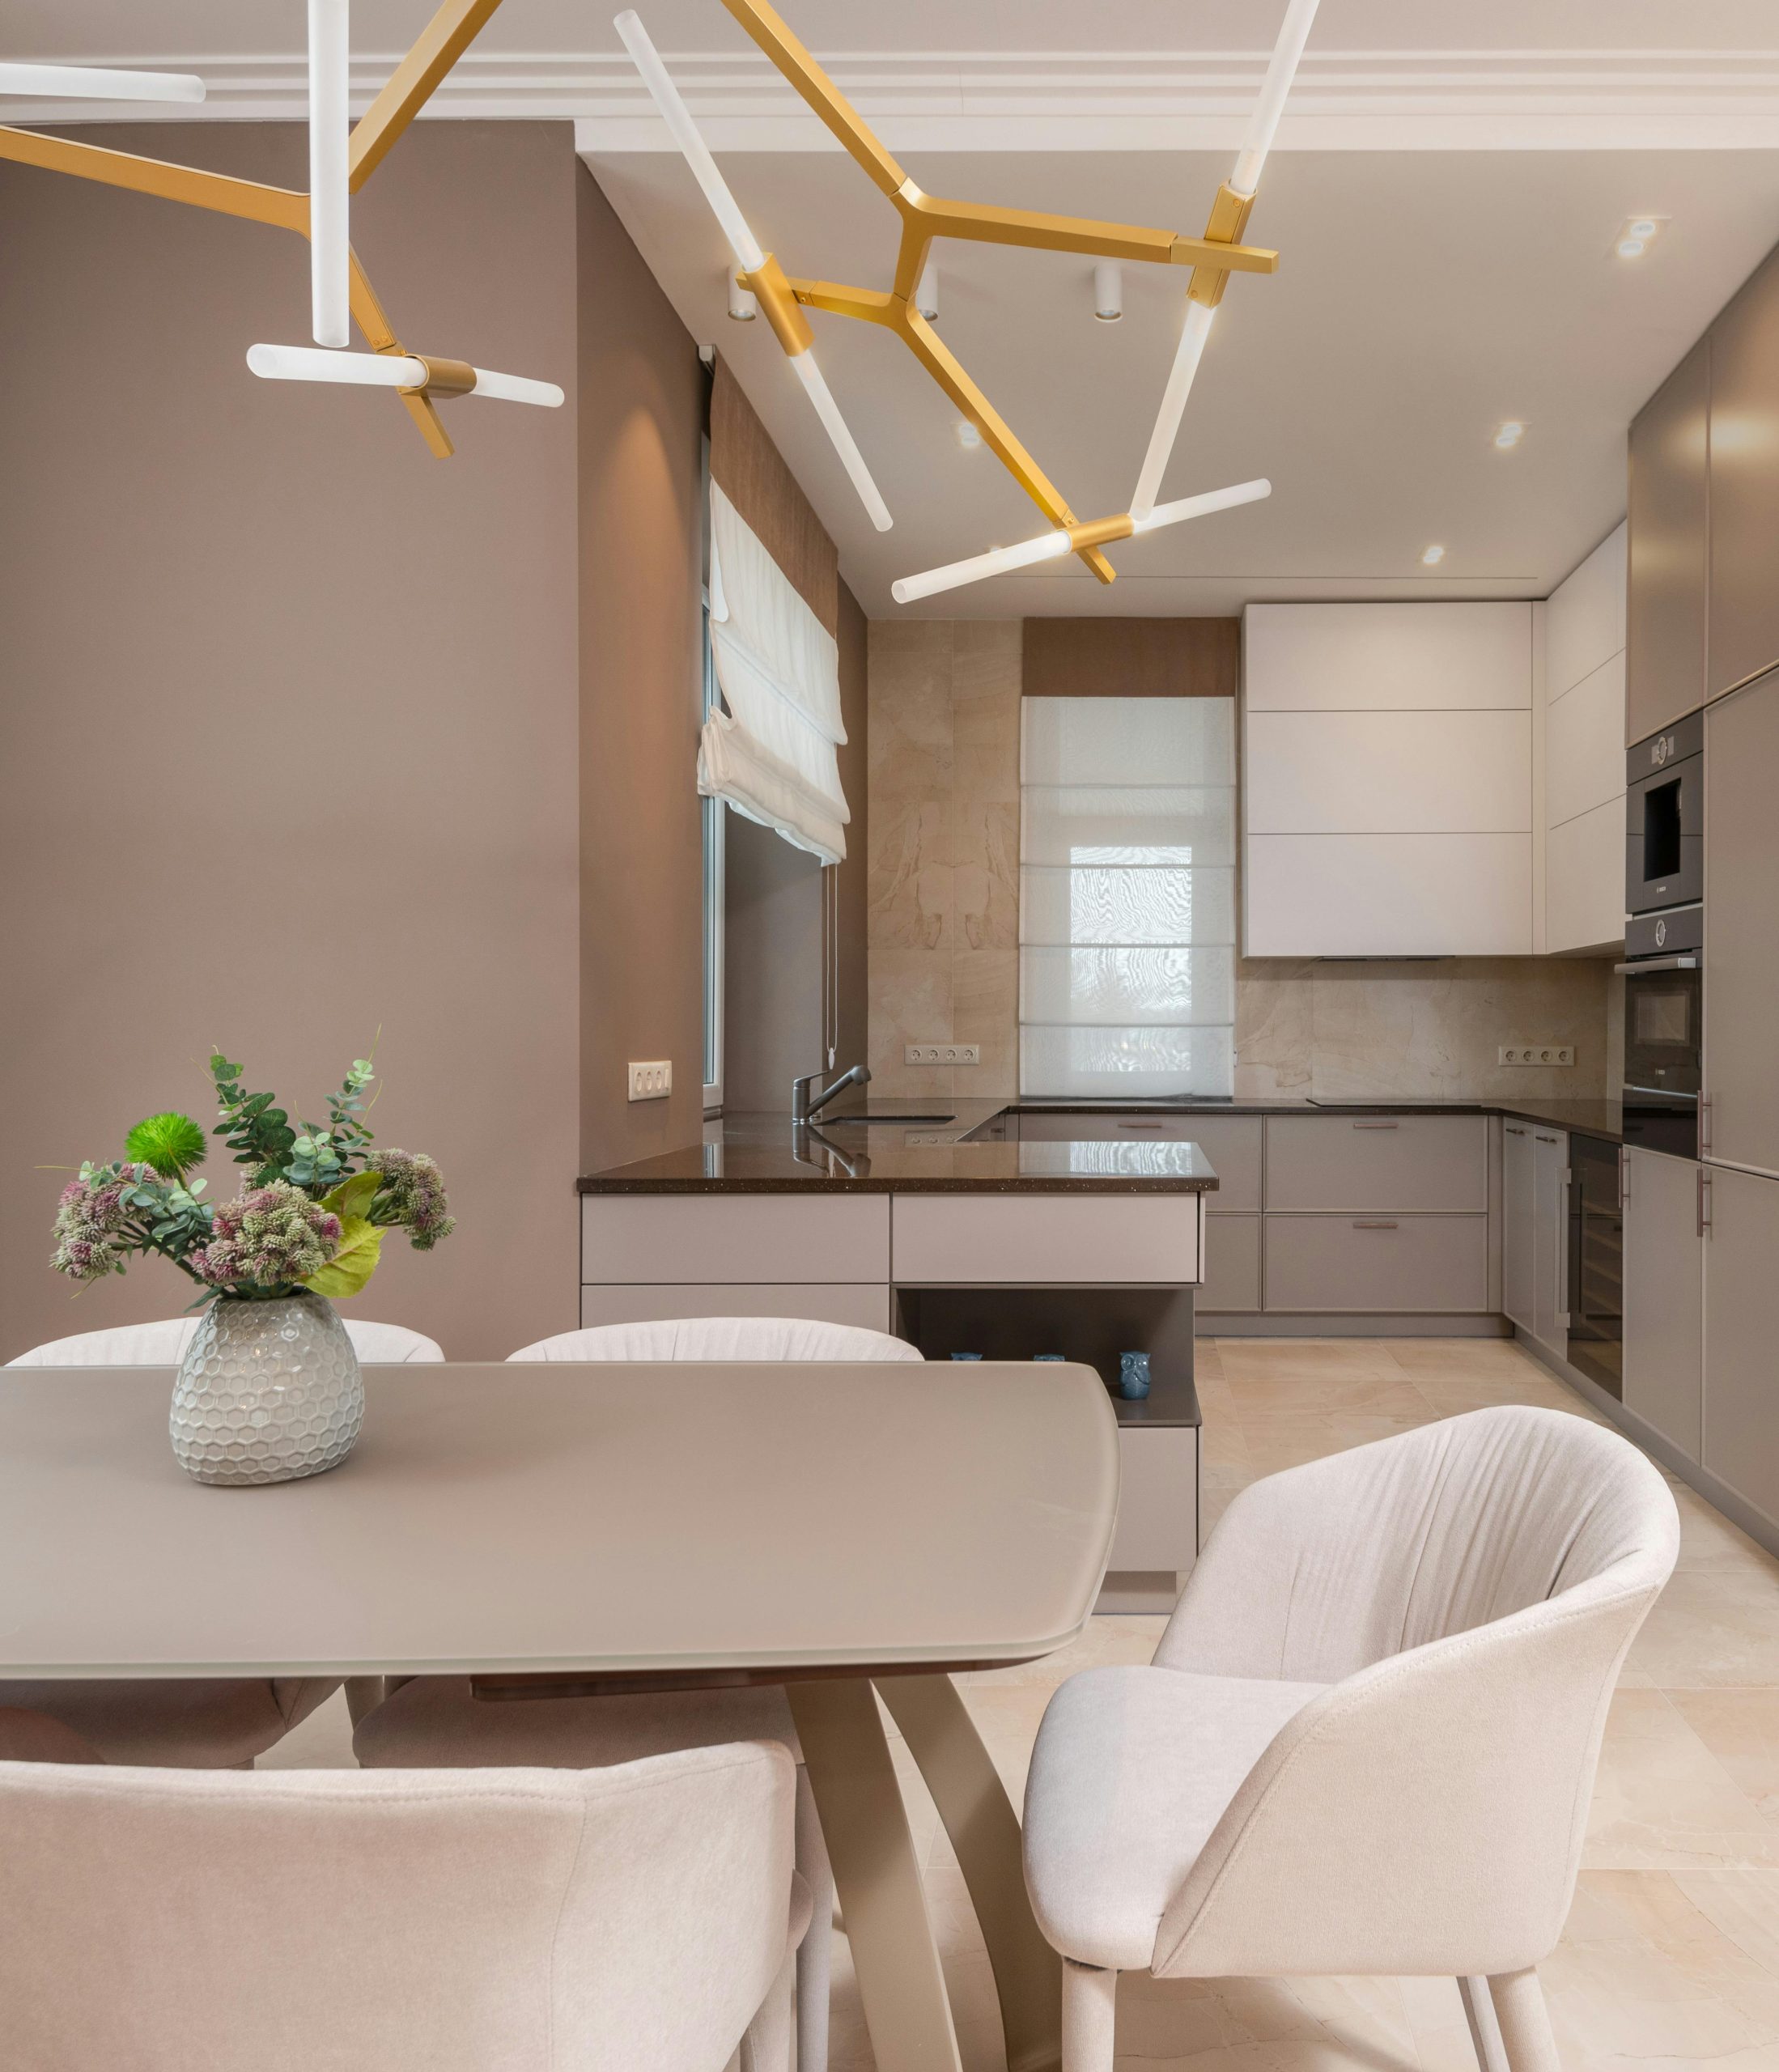 Planning and Design Considerations for Your Kitchen Ceiling